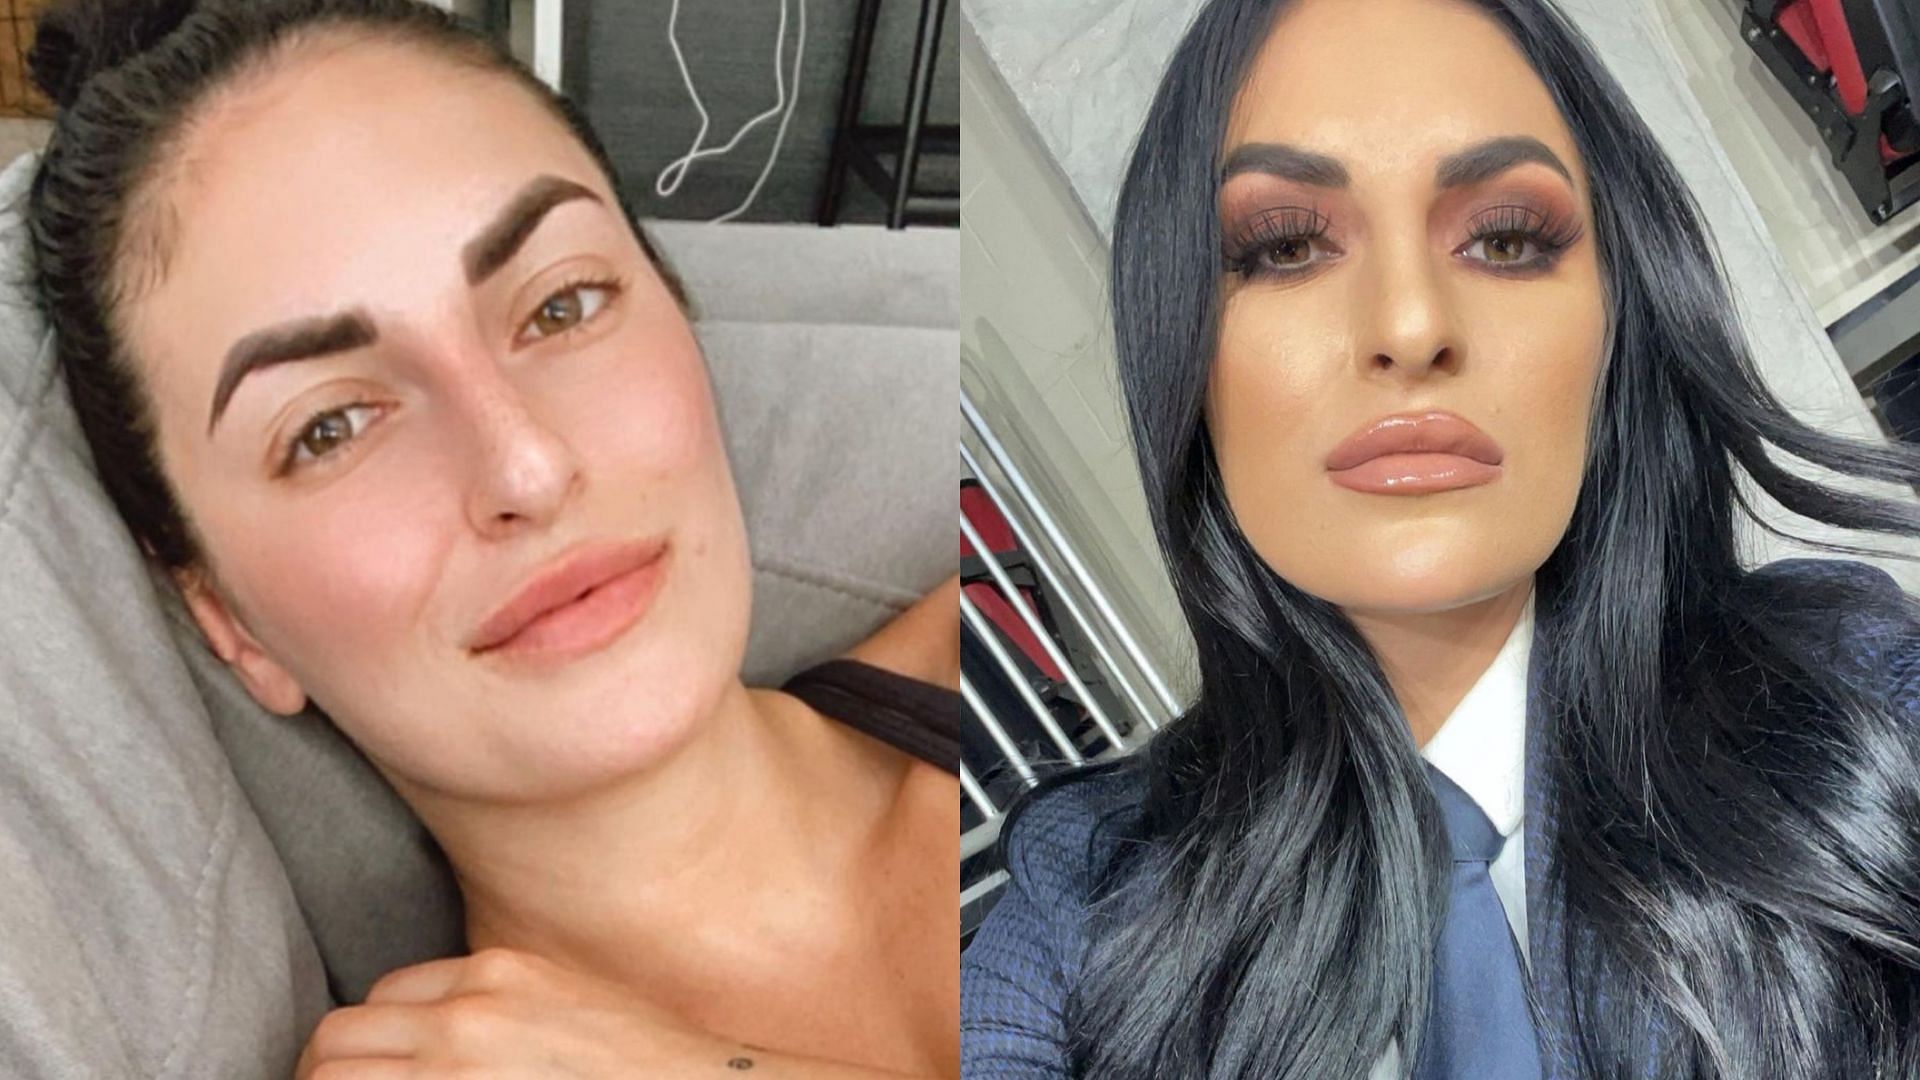 Sonya Deville without makeup (left) and with makeup (right)